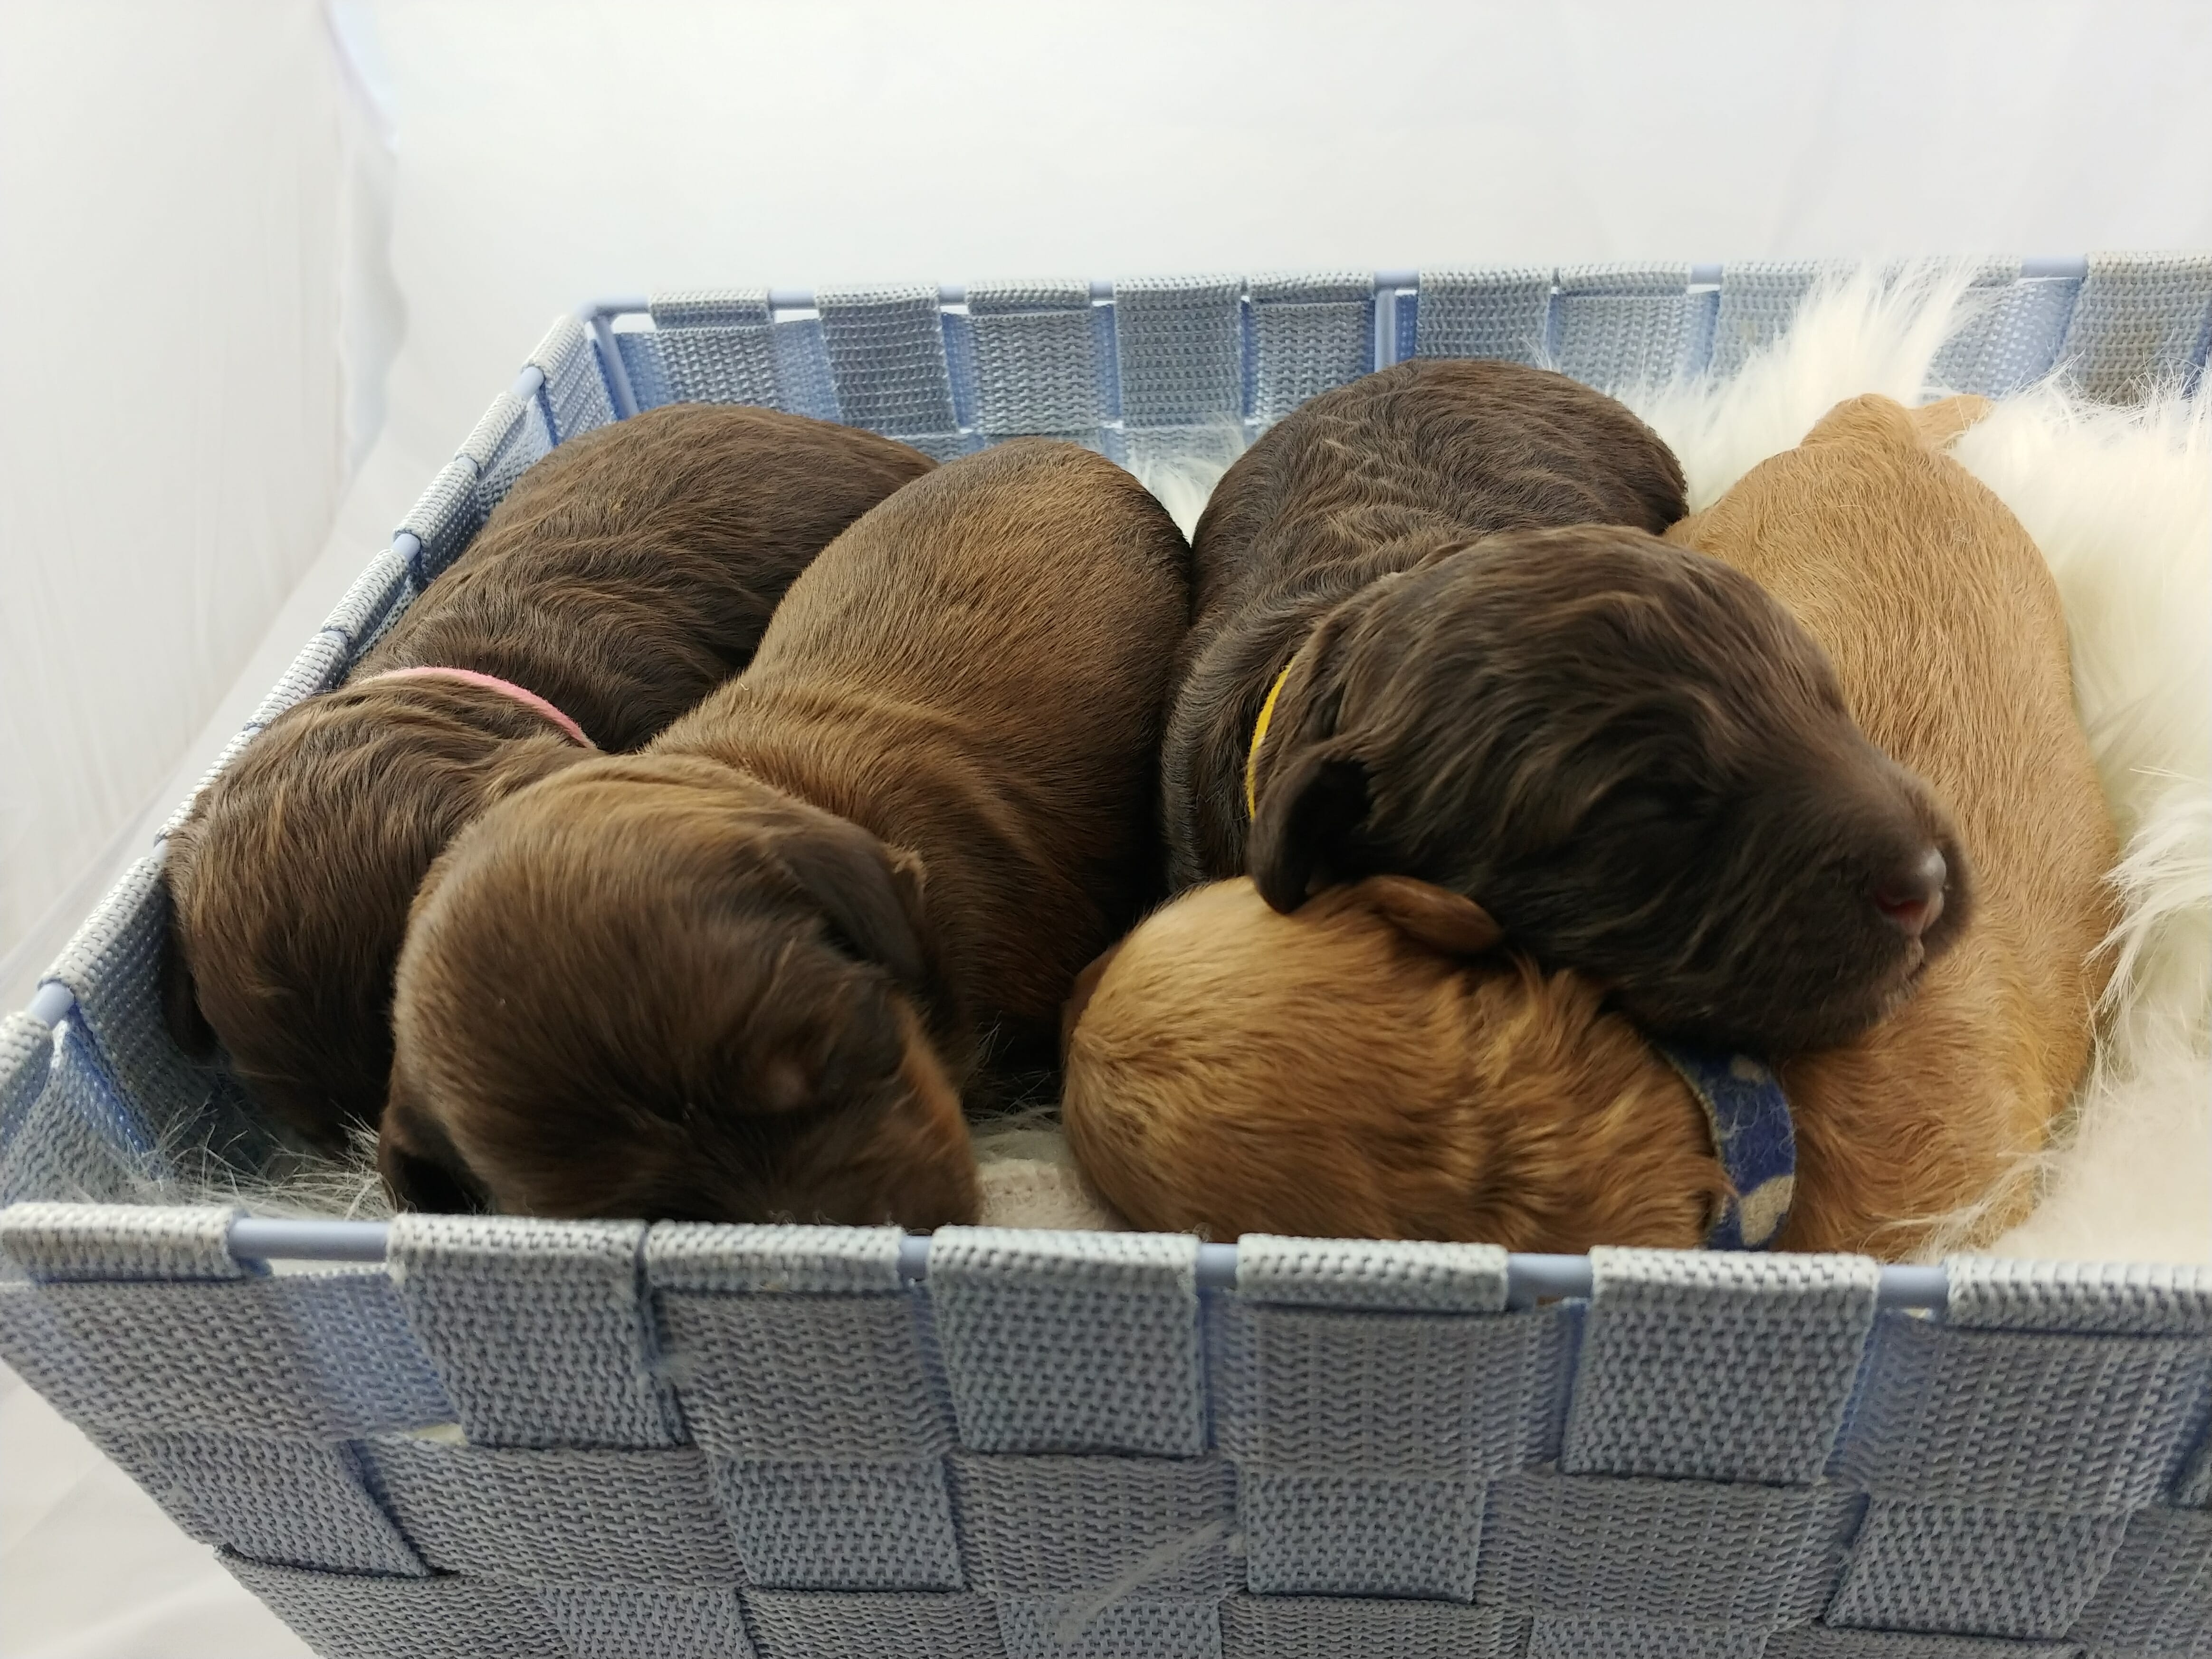 four puppies in a box with a fuzzy blanket. Puppies are red, brown and light brown. all sleeeping and pointing the same way. one puppy has its head on top of another puppy.